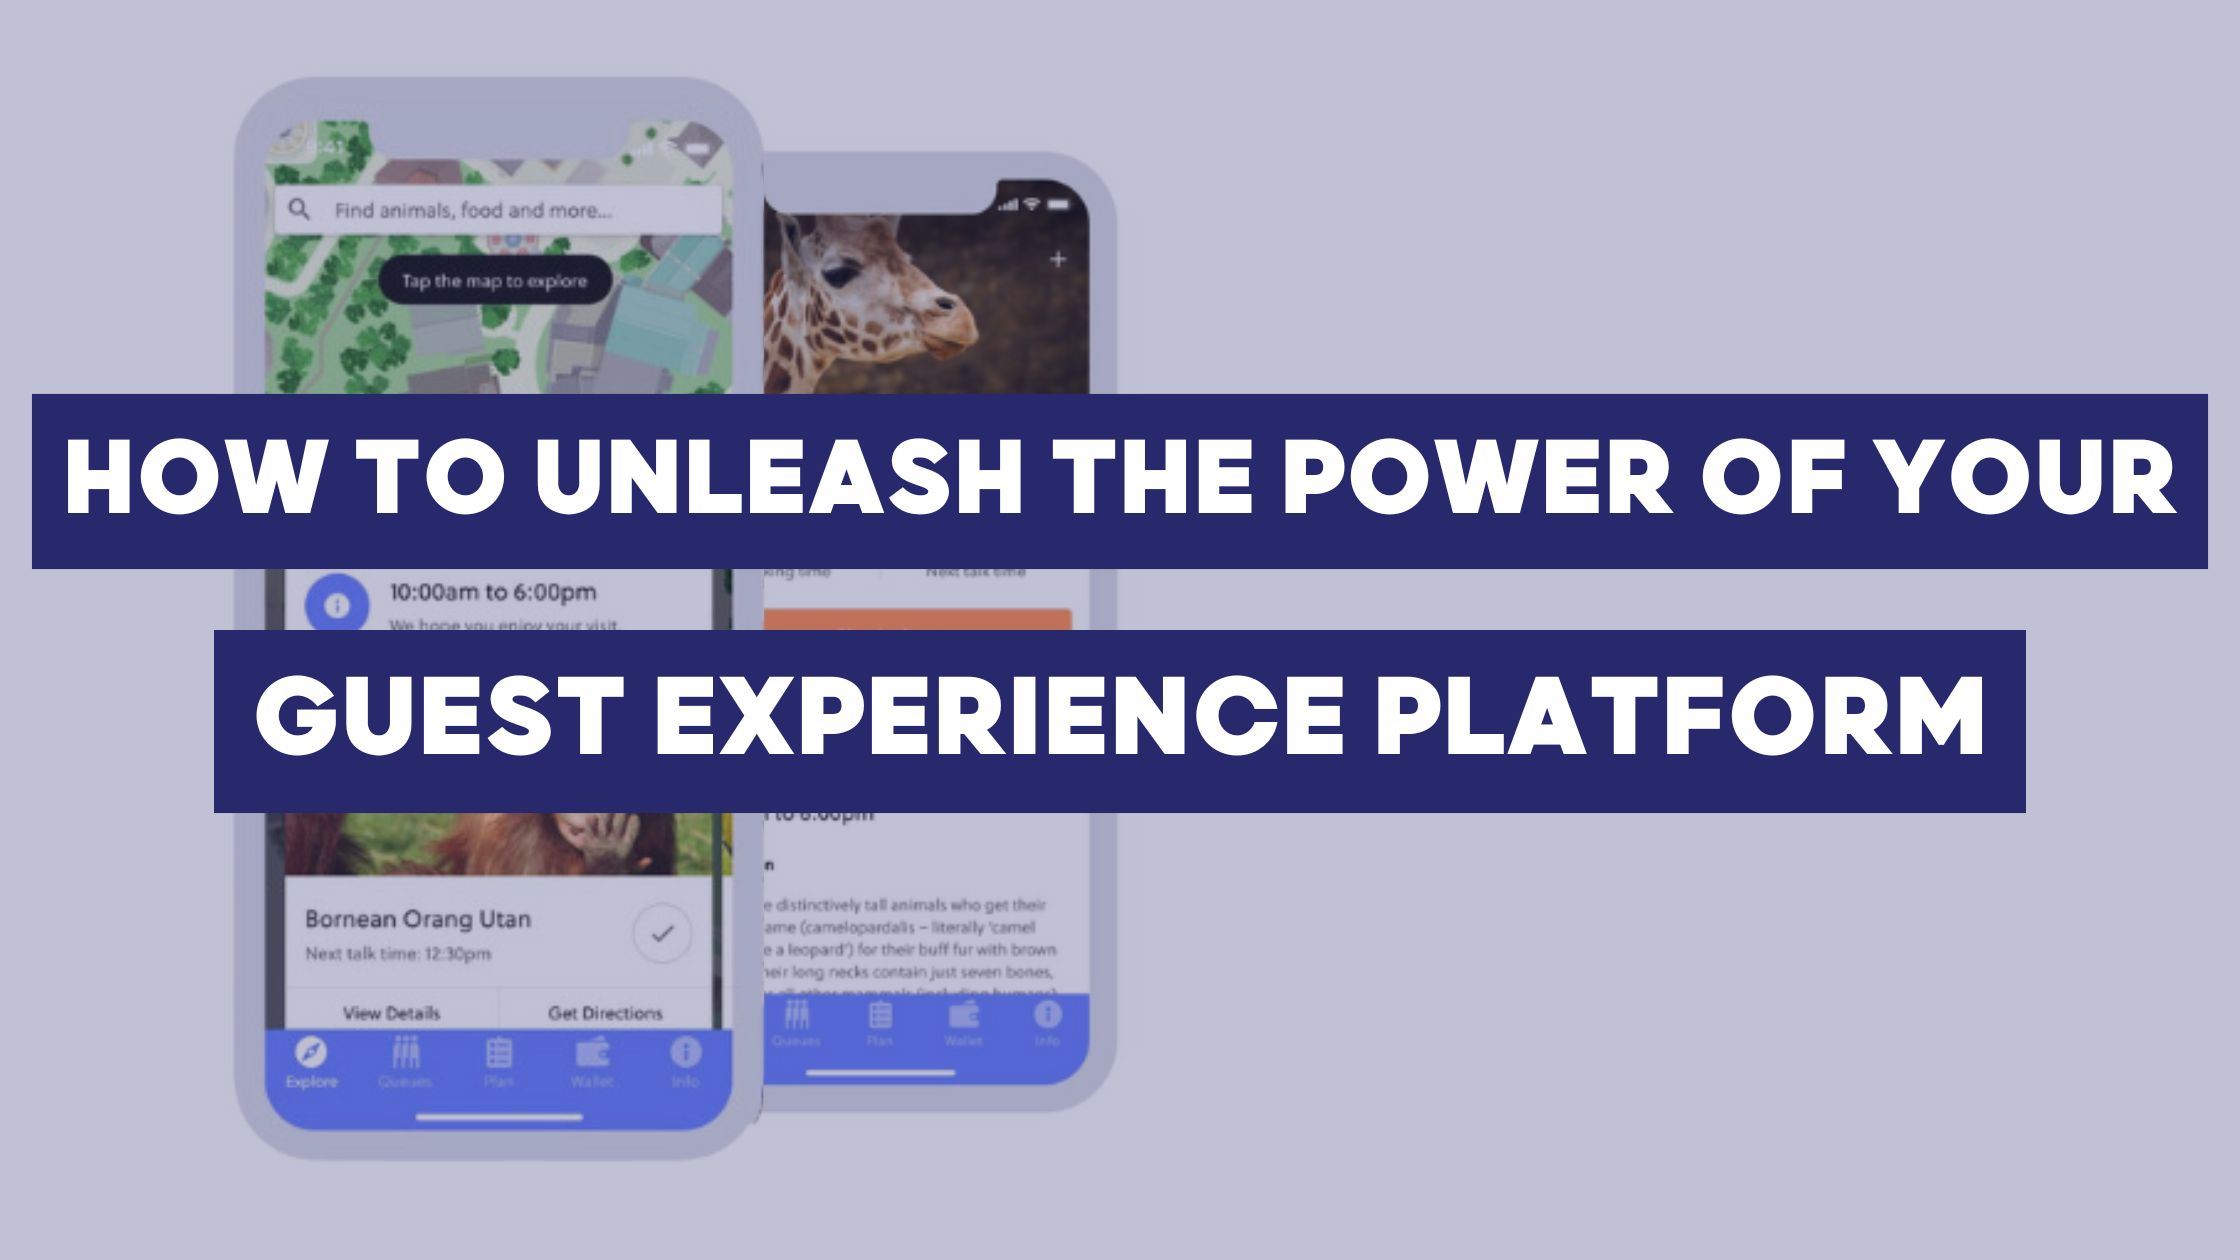 How to Unleash the Power of Your Guest Experience Platform